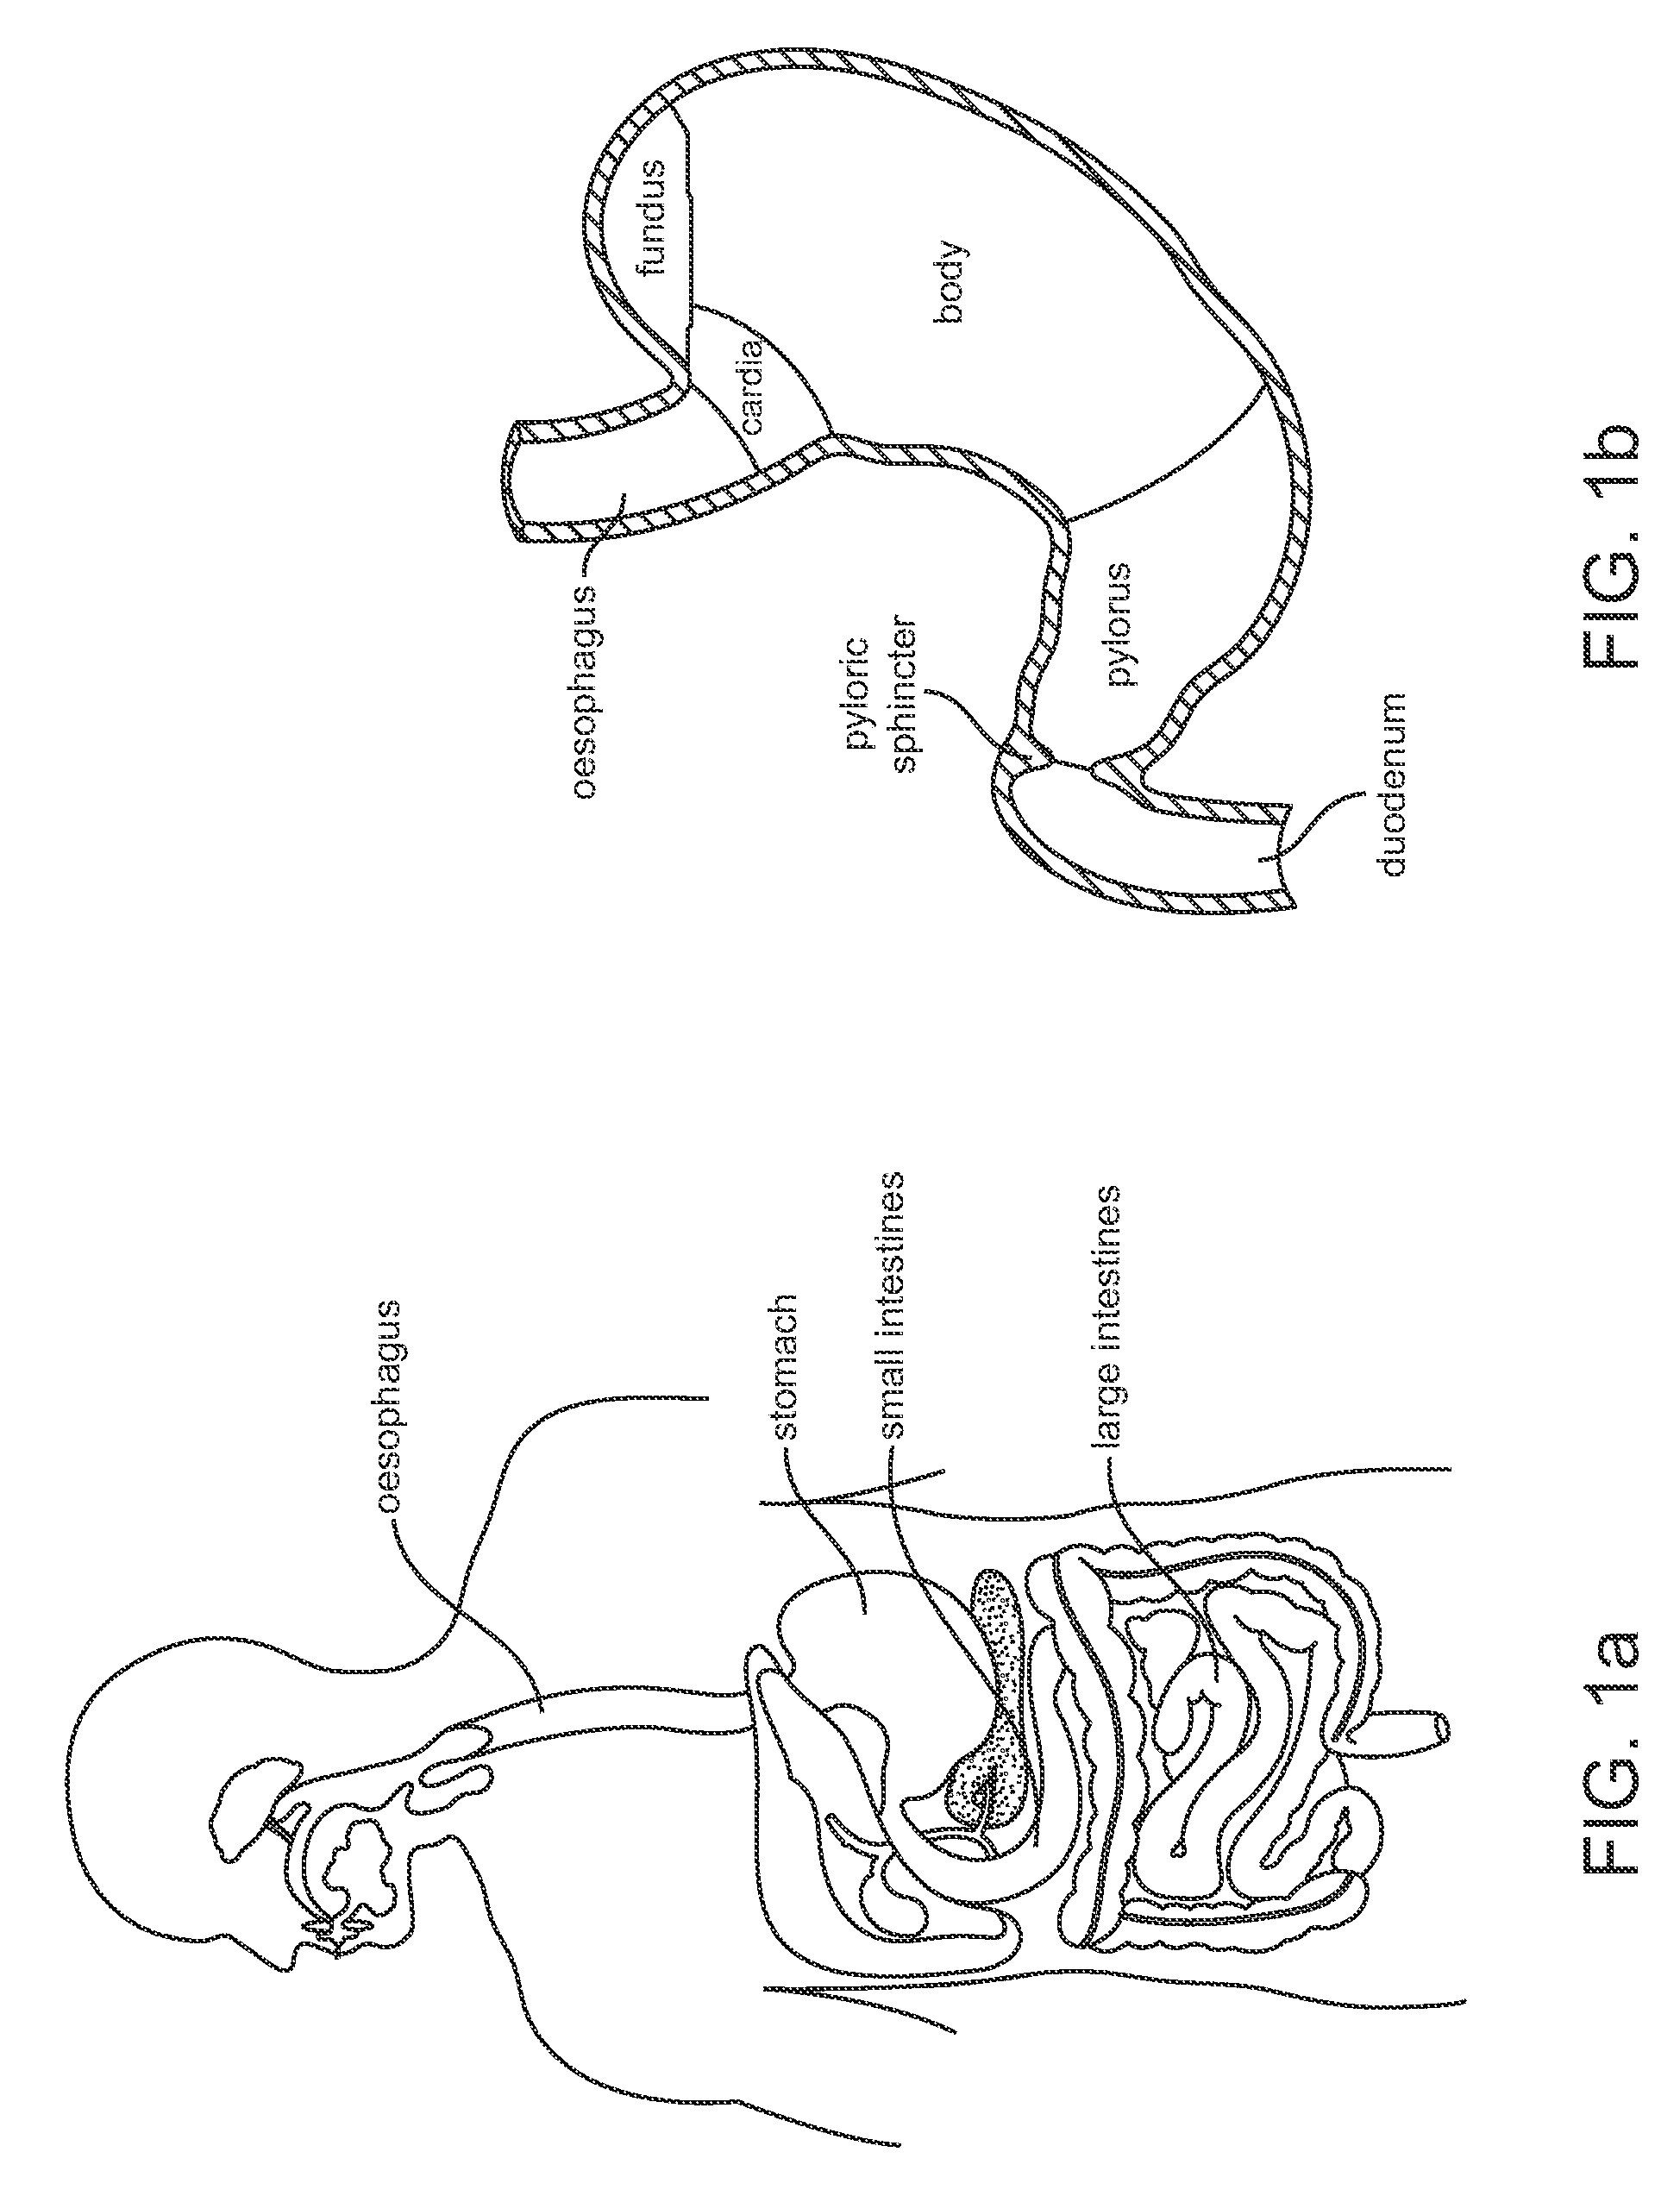 Systems and methods for implantable leadless gastrointestinal tissue stimulation